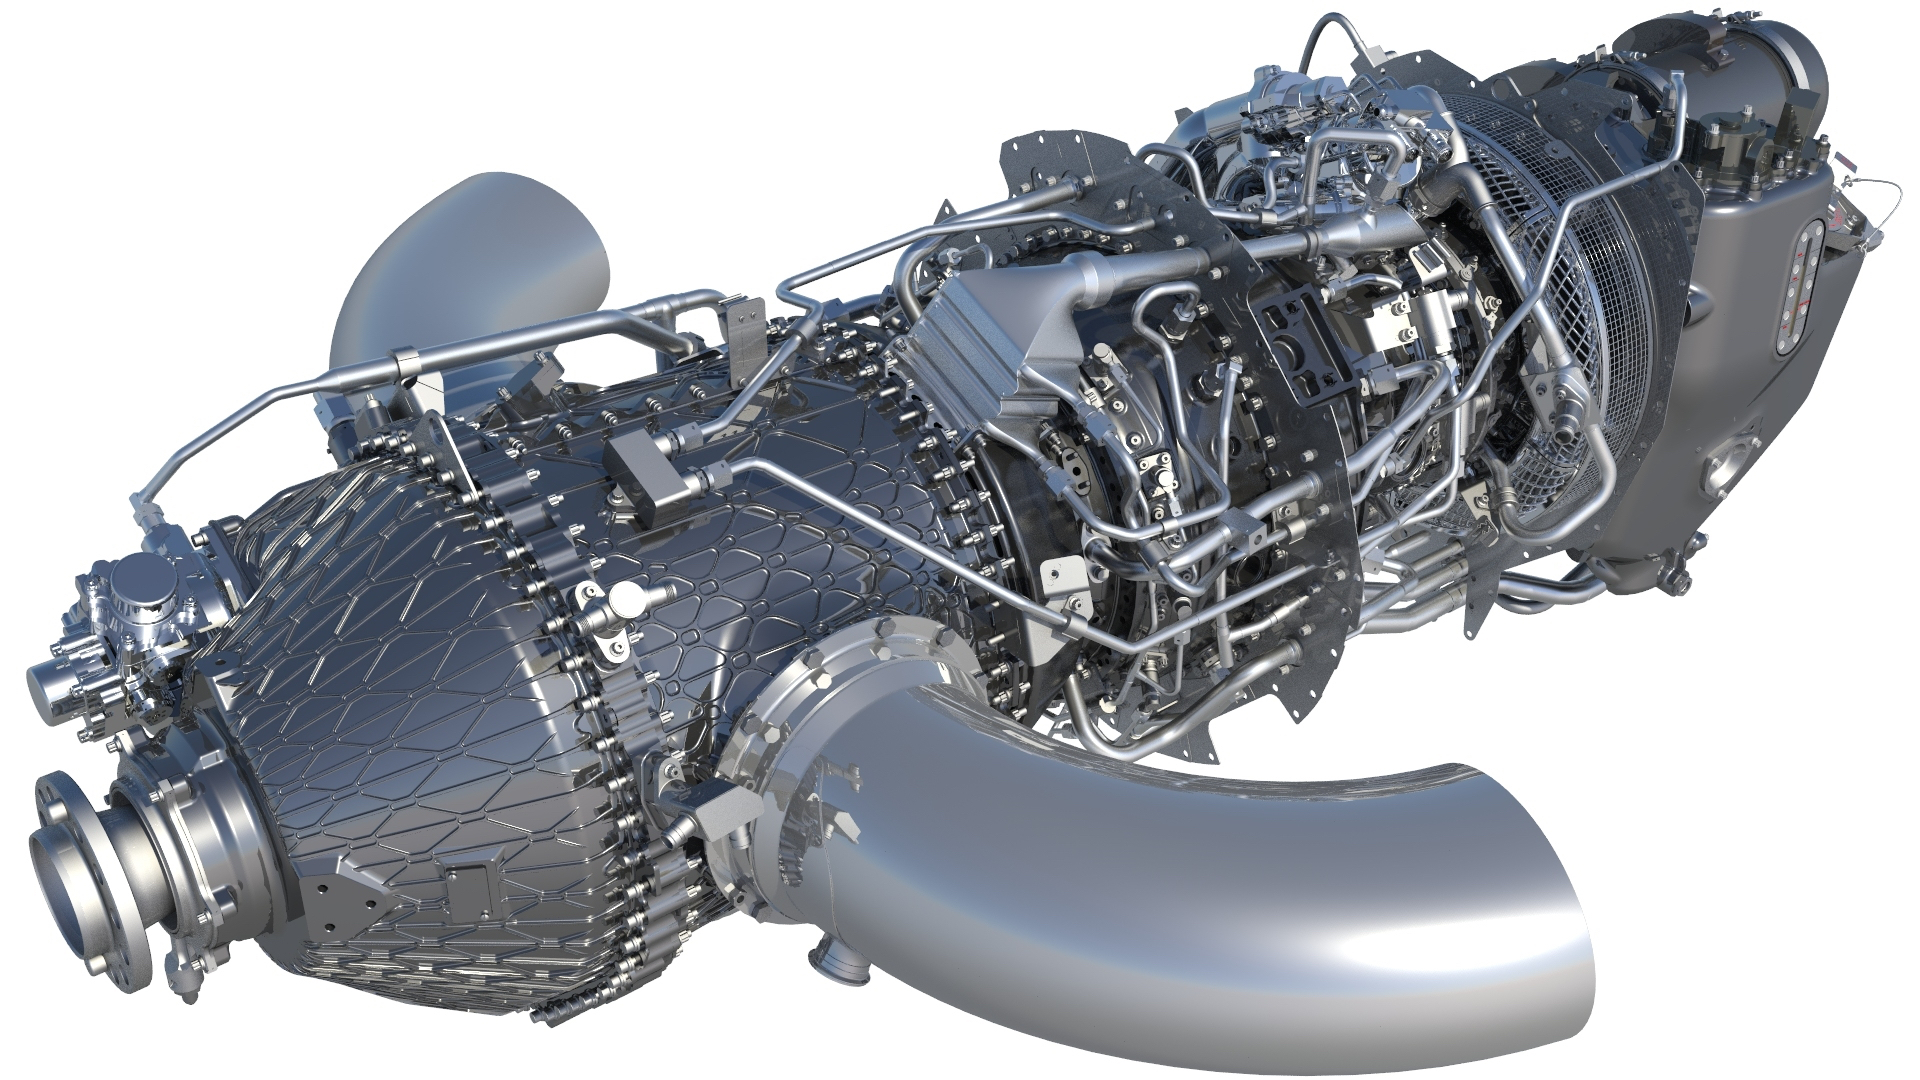 GE's 3D-Printed Airplane Engine Will Run This Year